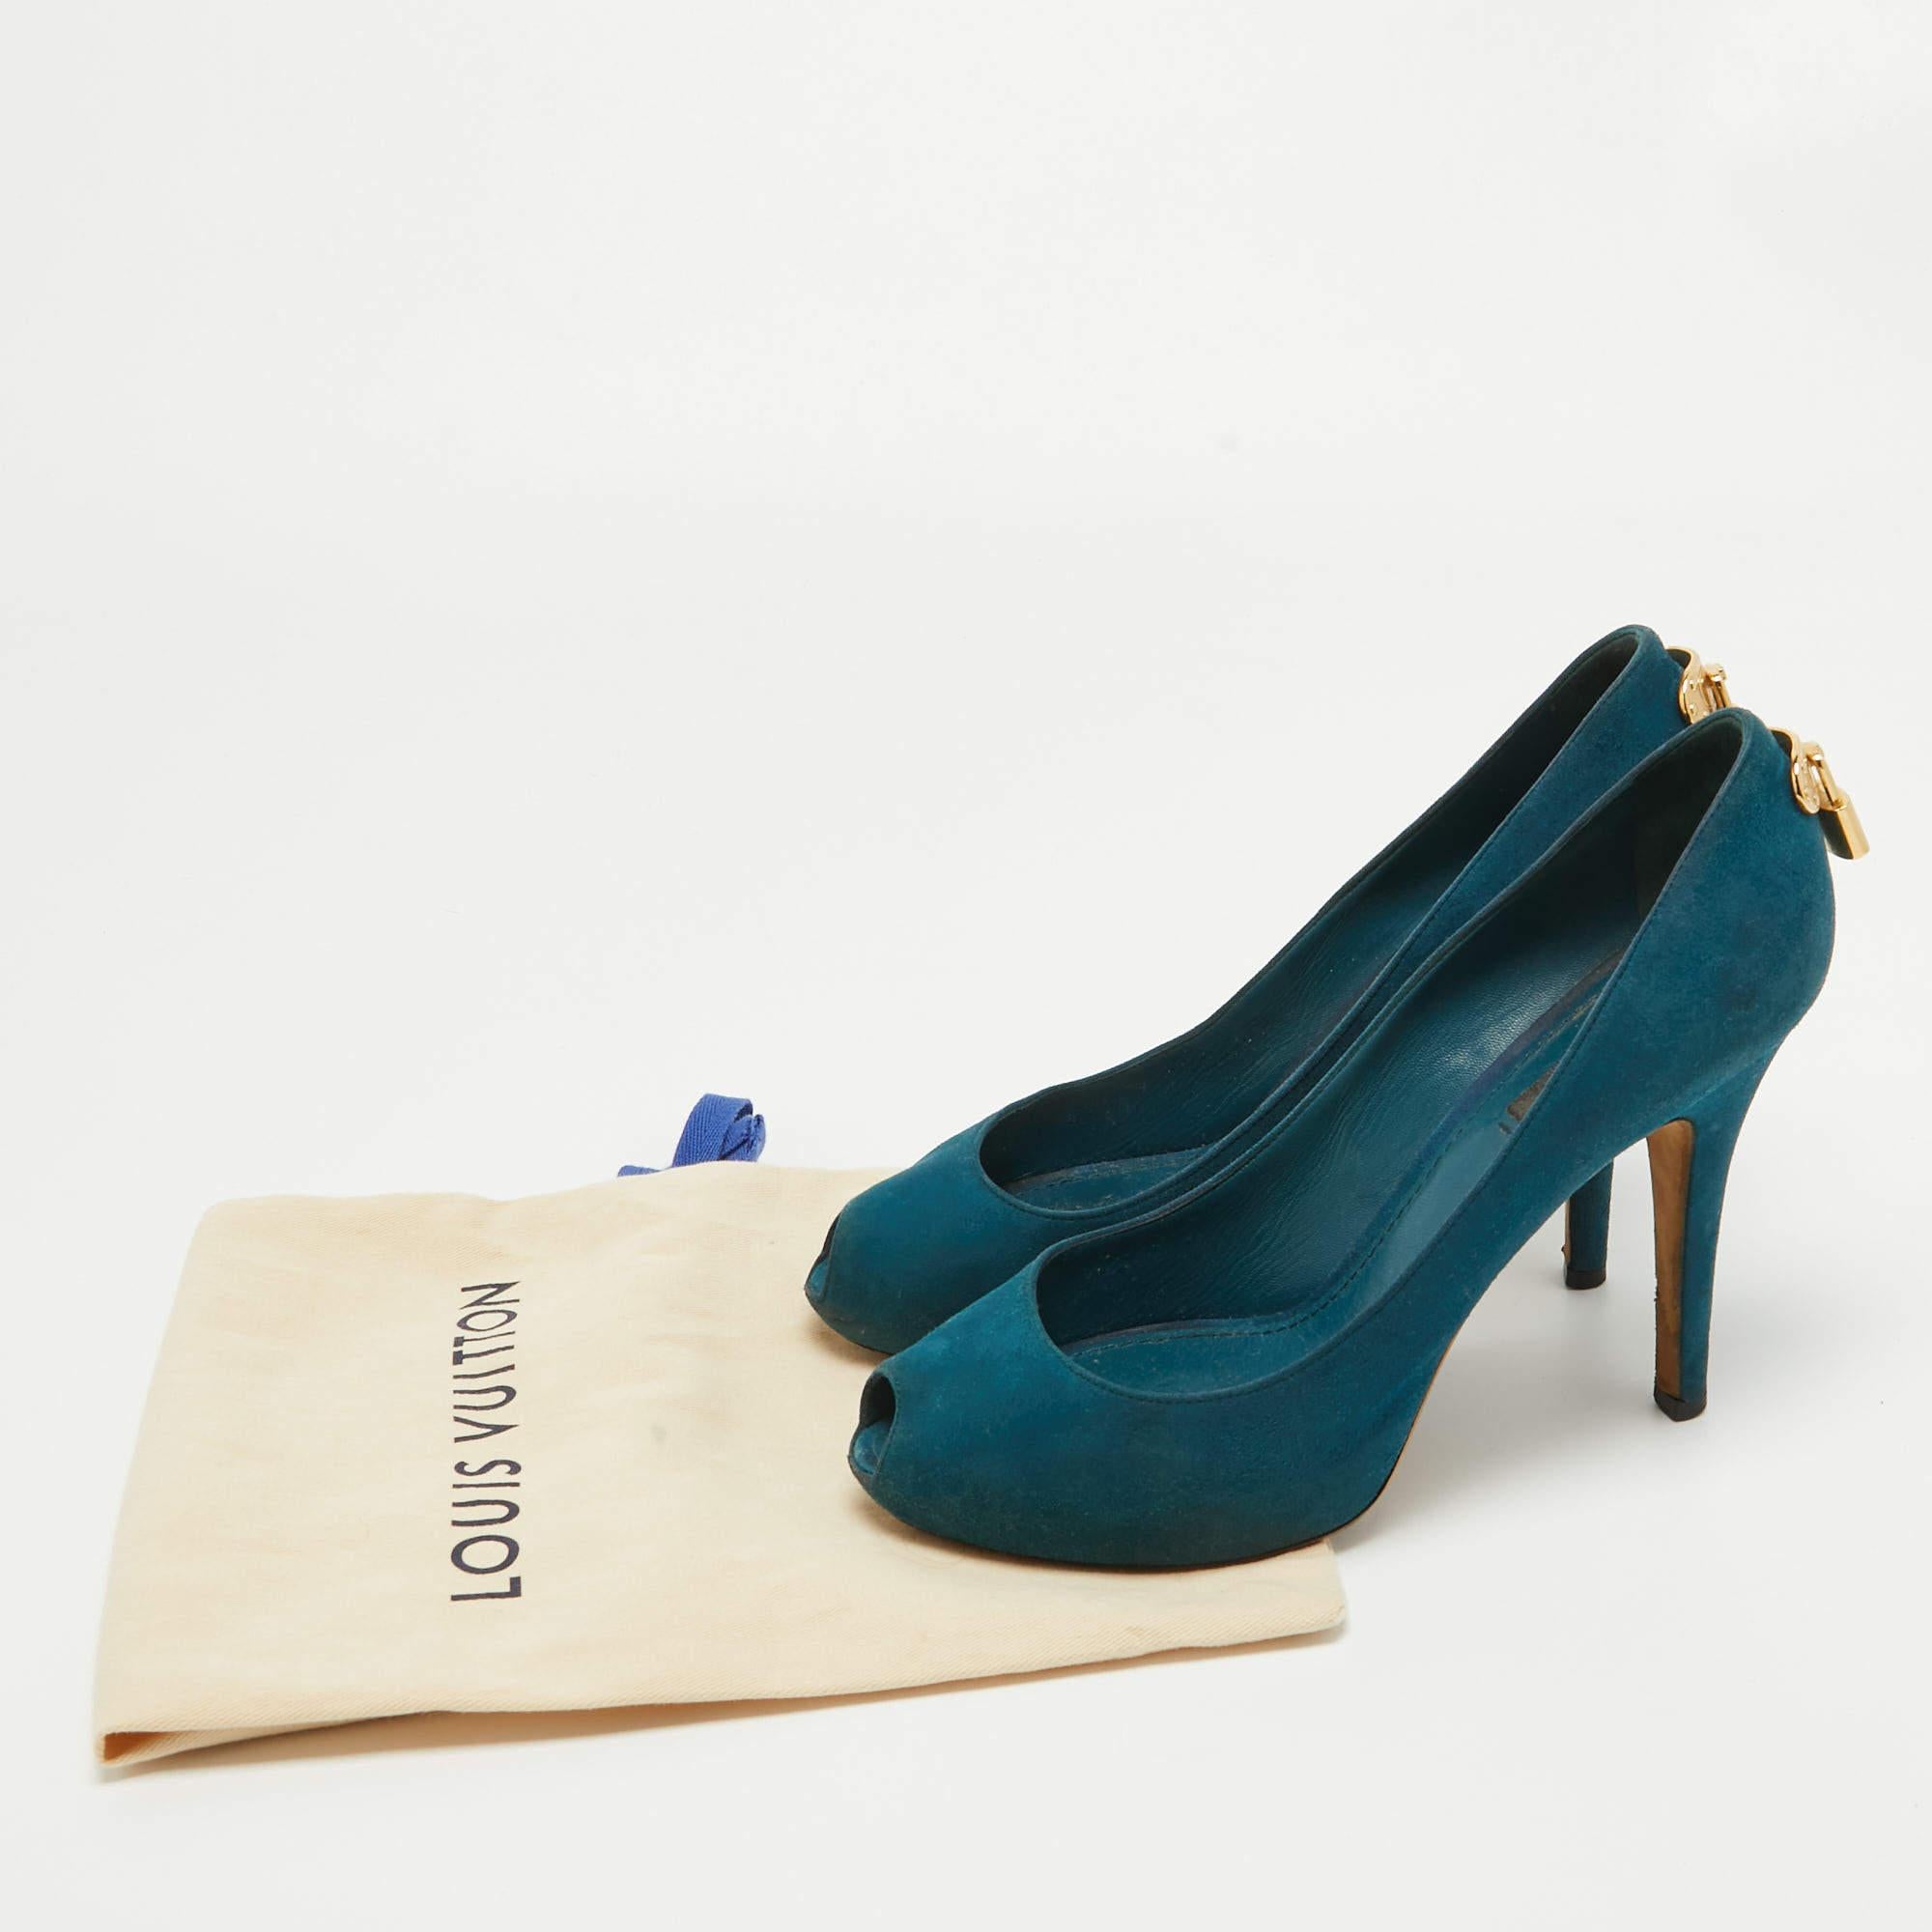 Louis Vuitton Teal Suede Oh Really! Peep Toe Pumps Size 38.5 For Sale 4